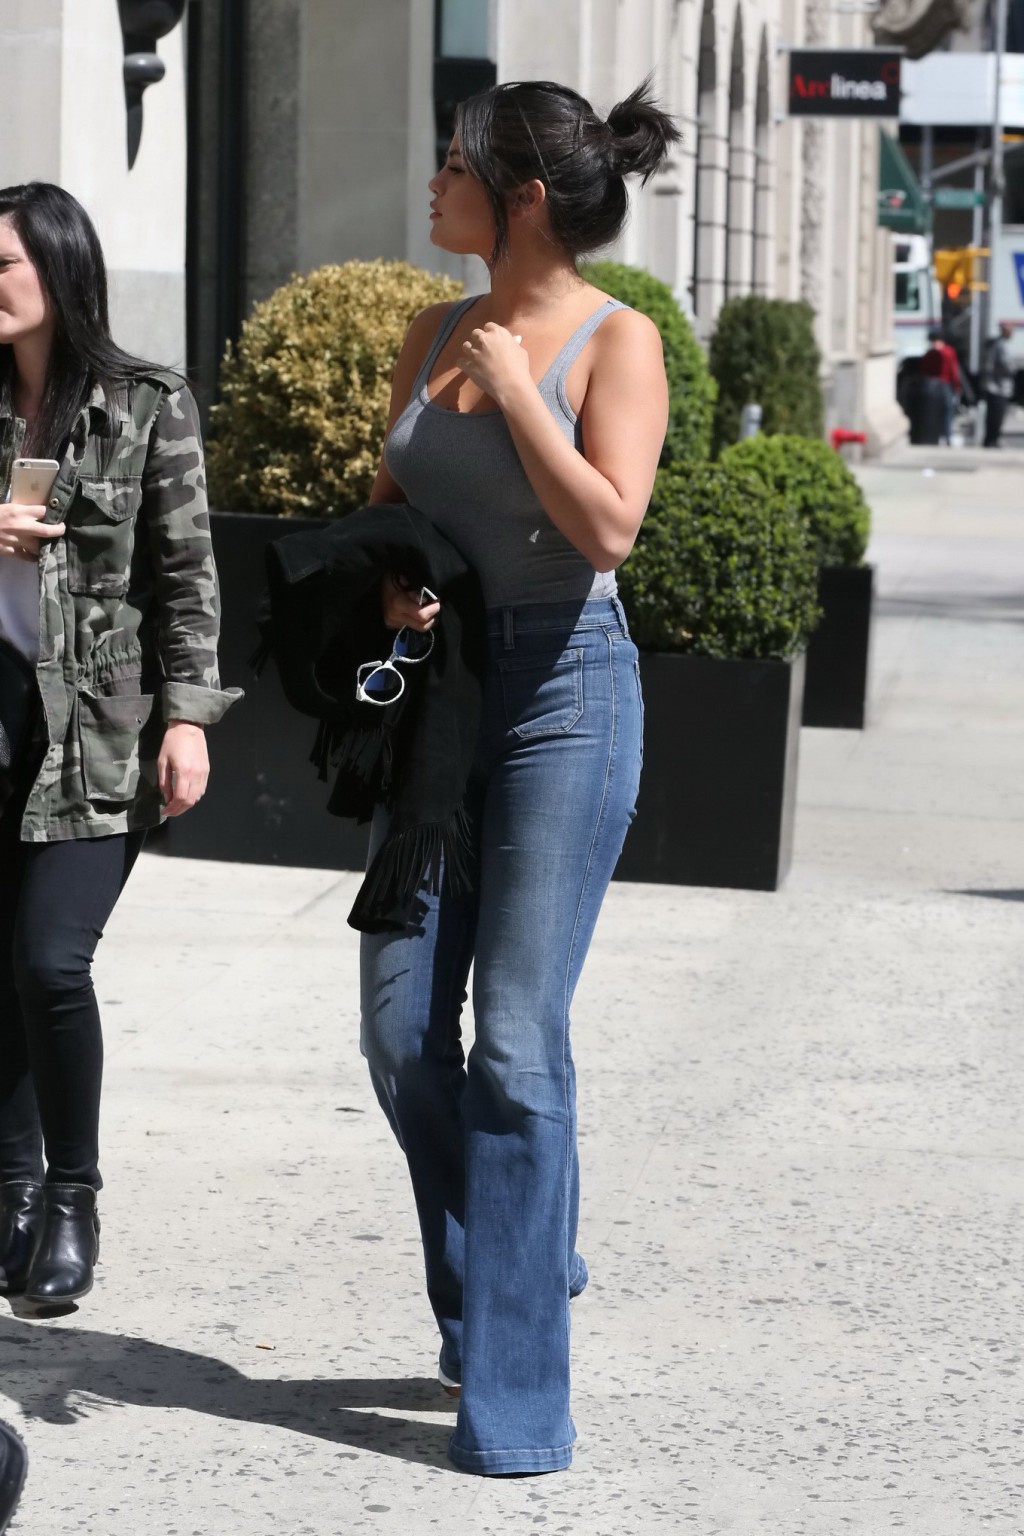 Selena Gomez busty wearing skimpy gray top and jeans out in NYC #75165033